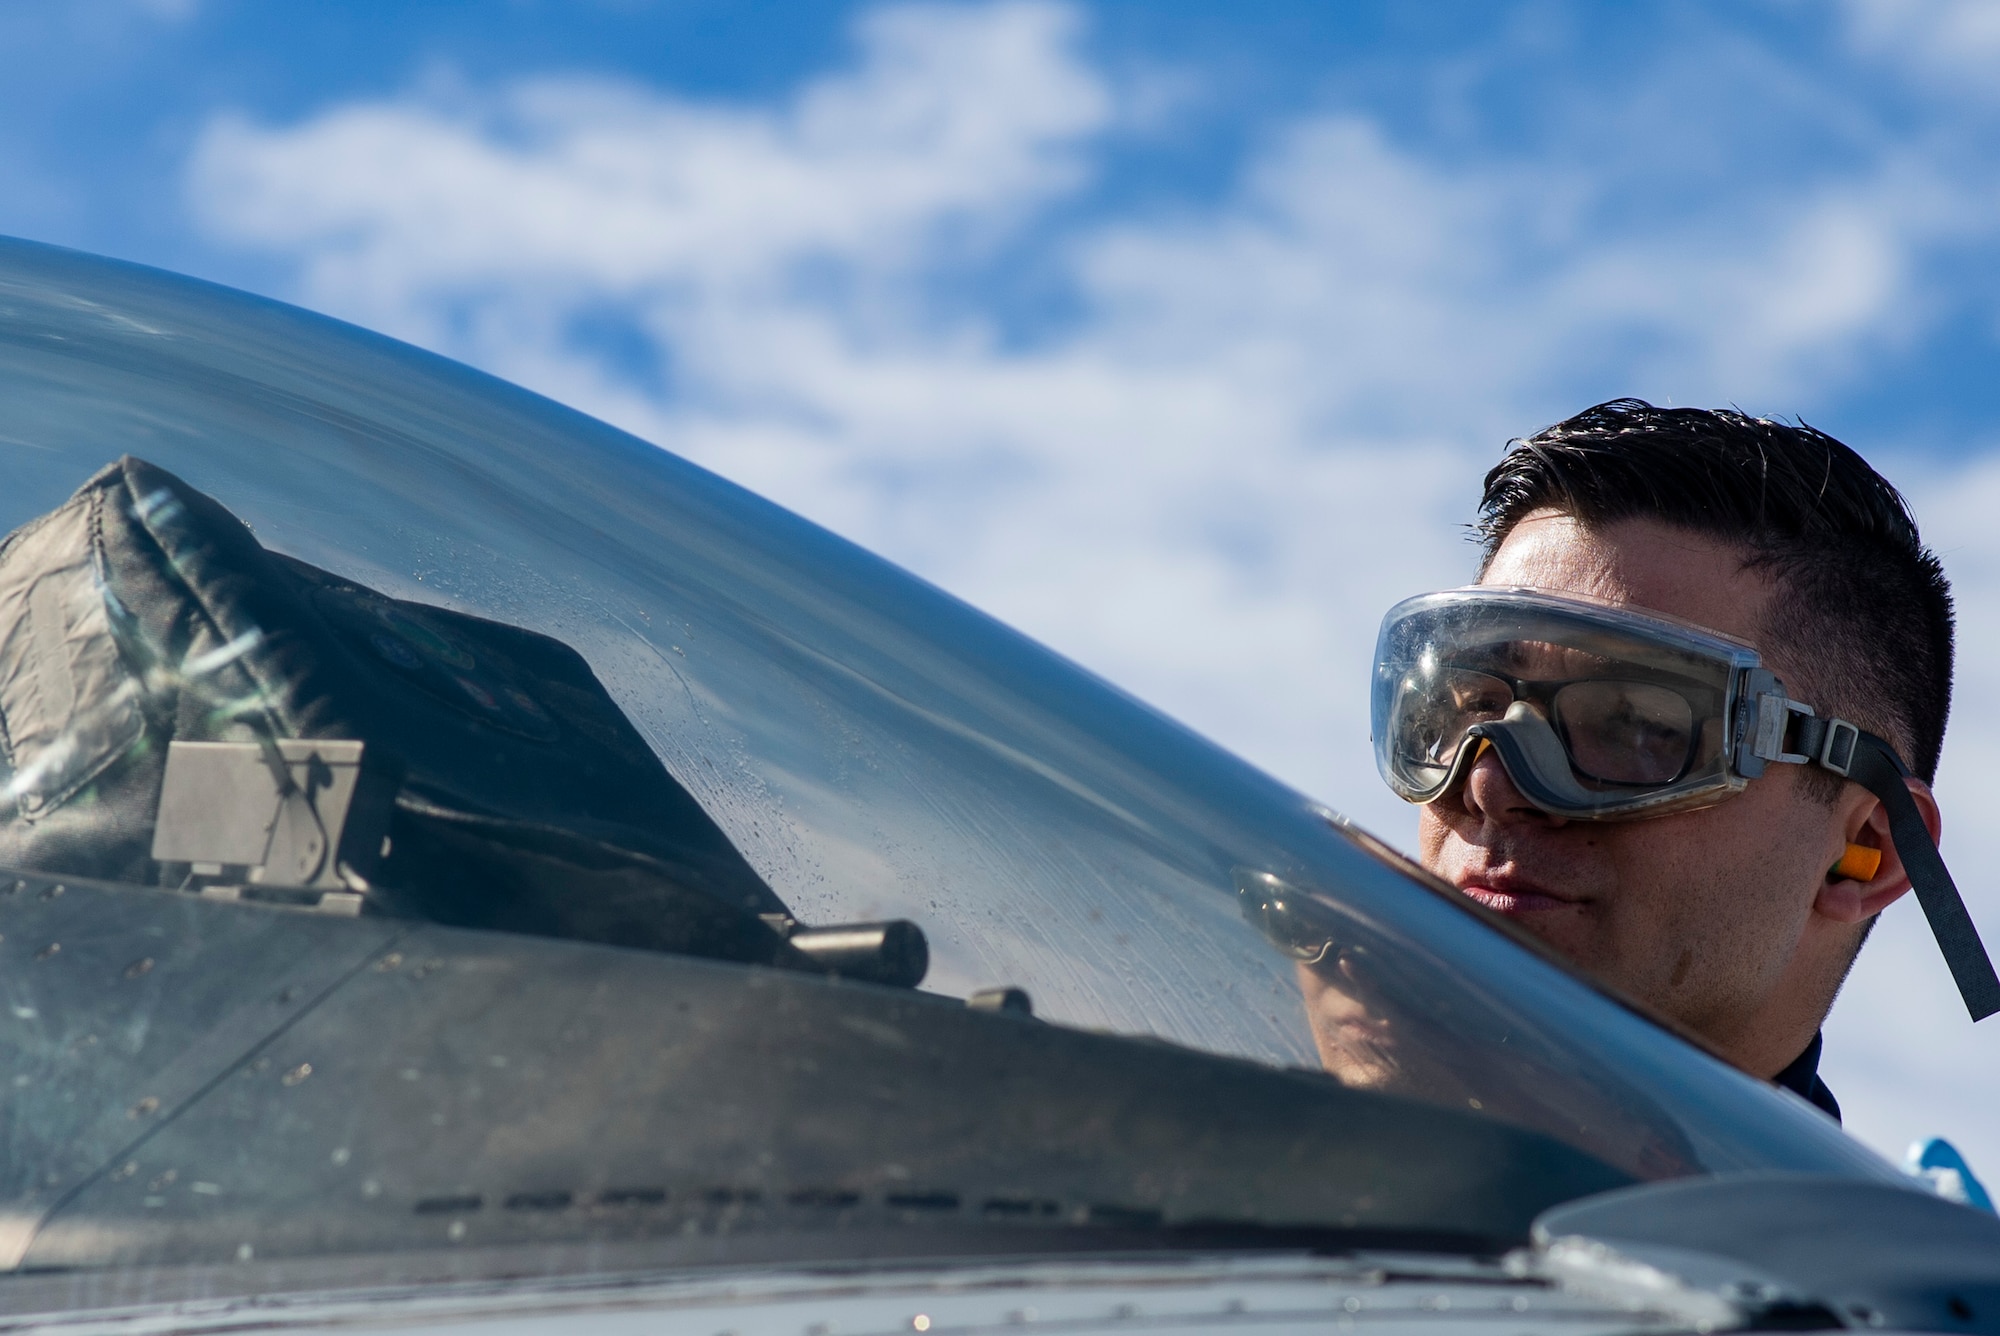 U.S. Air Force Senior Airman Eric Conner, 20th Aircraft Maintenance Squadron, 79th Aircraft Maintenance Unit crew chief, cleans the canopy of an F-16CM Fighting Falcon during Exercise Red Flag 19-1 at Nellis Air Force Base, Nev., Jan. 28, 2019.